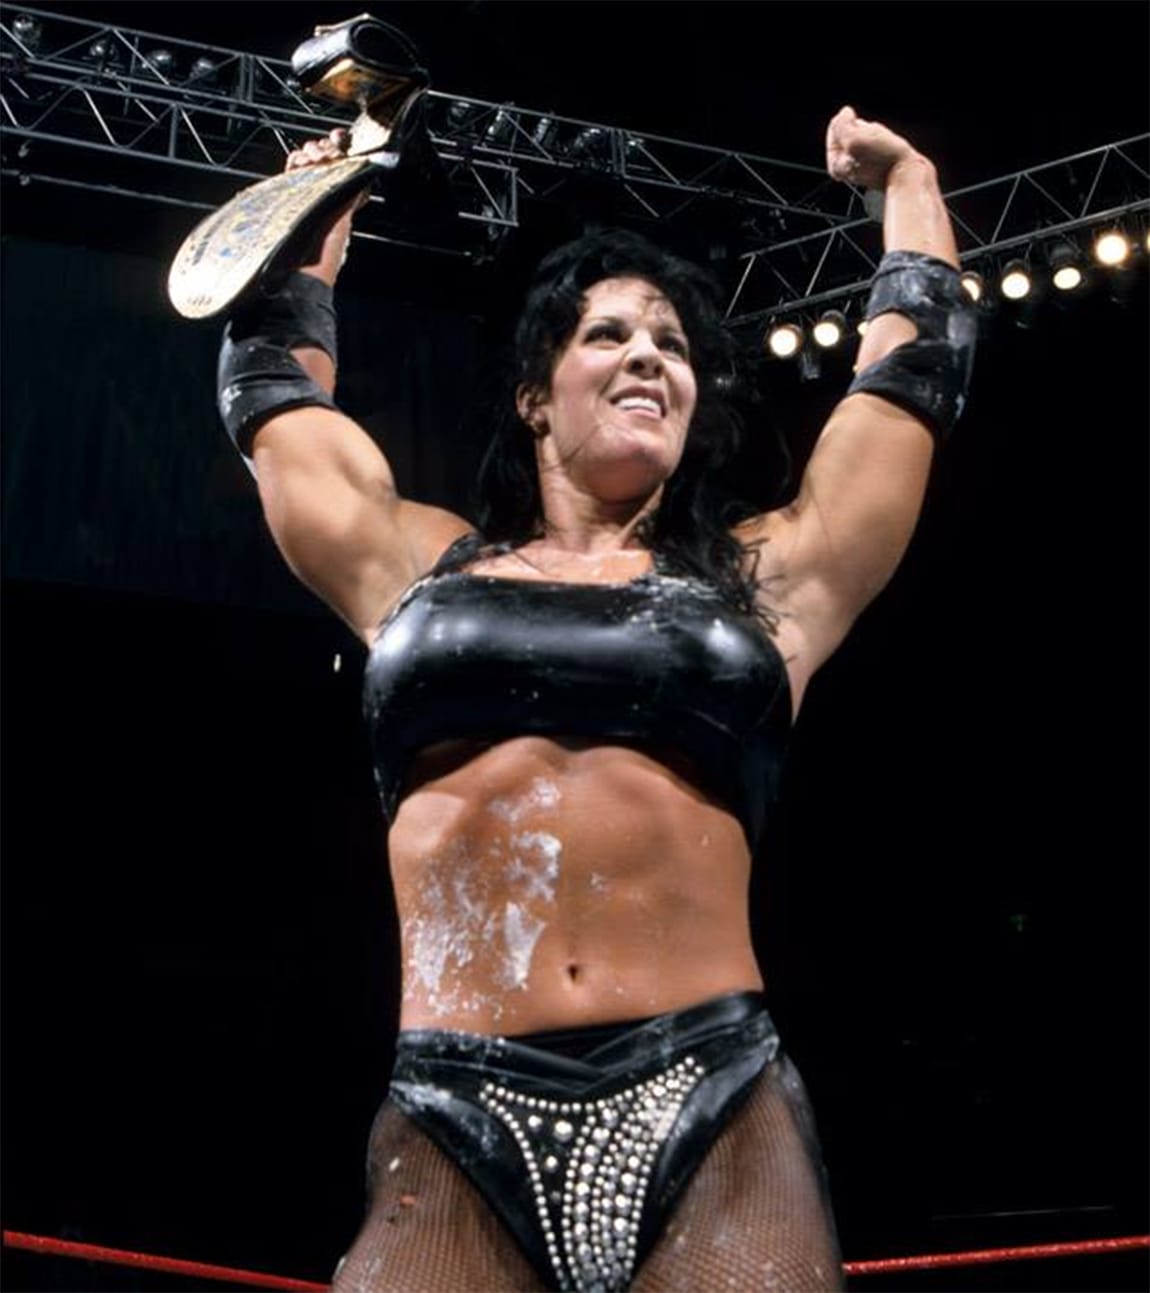 Laurer, known for her wrestling name Chyna, was a female pioneer in the mal...